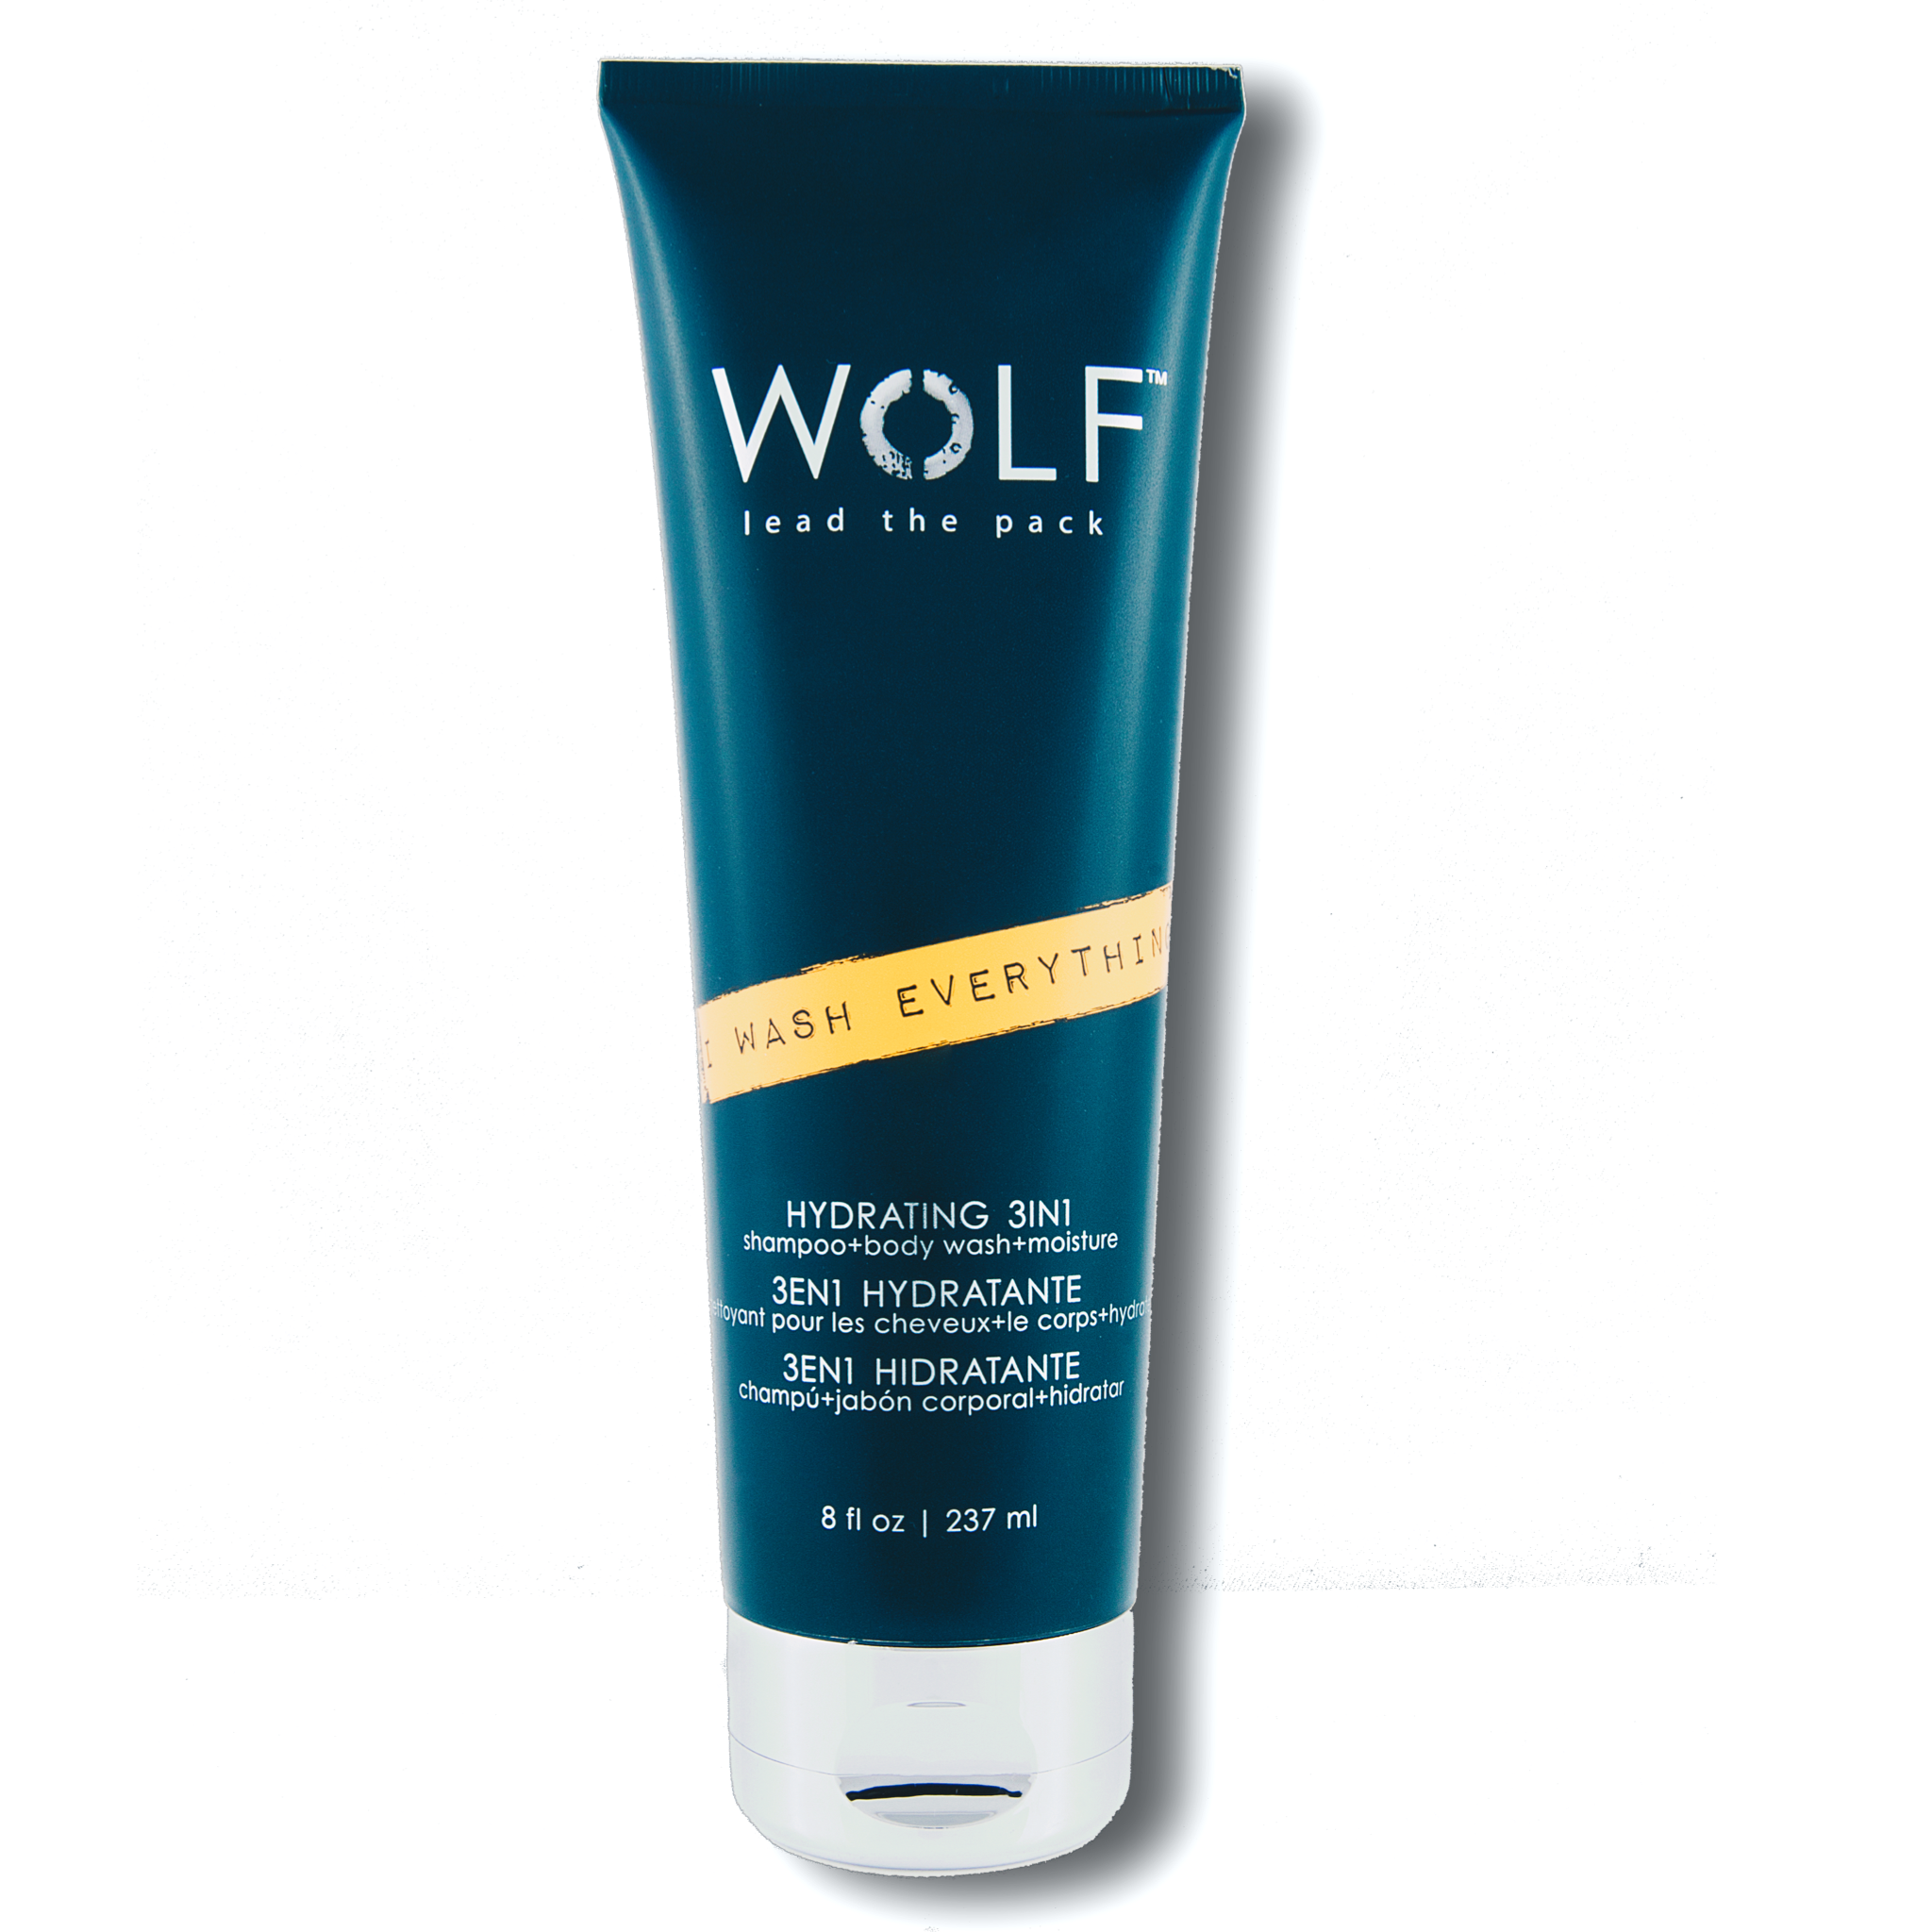 I WASH EVERYTHING Hydrating 3IN1, 8 fl oz - Wolf Grooming